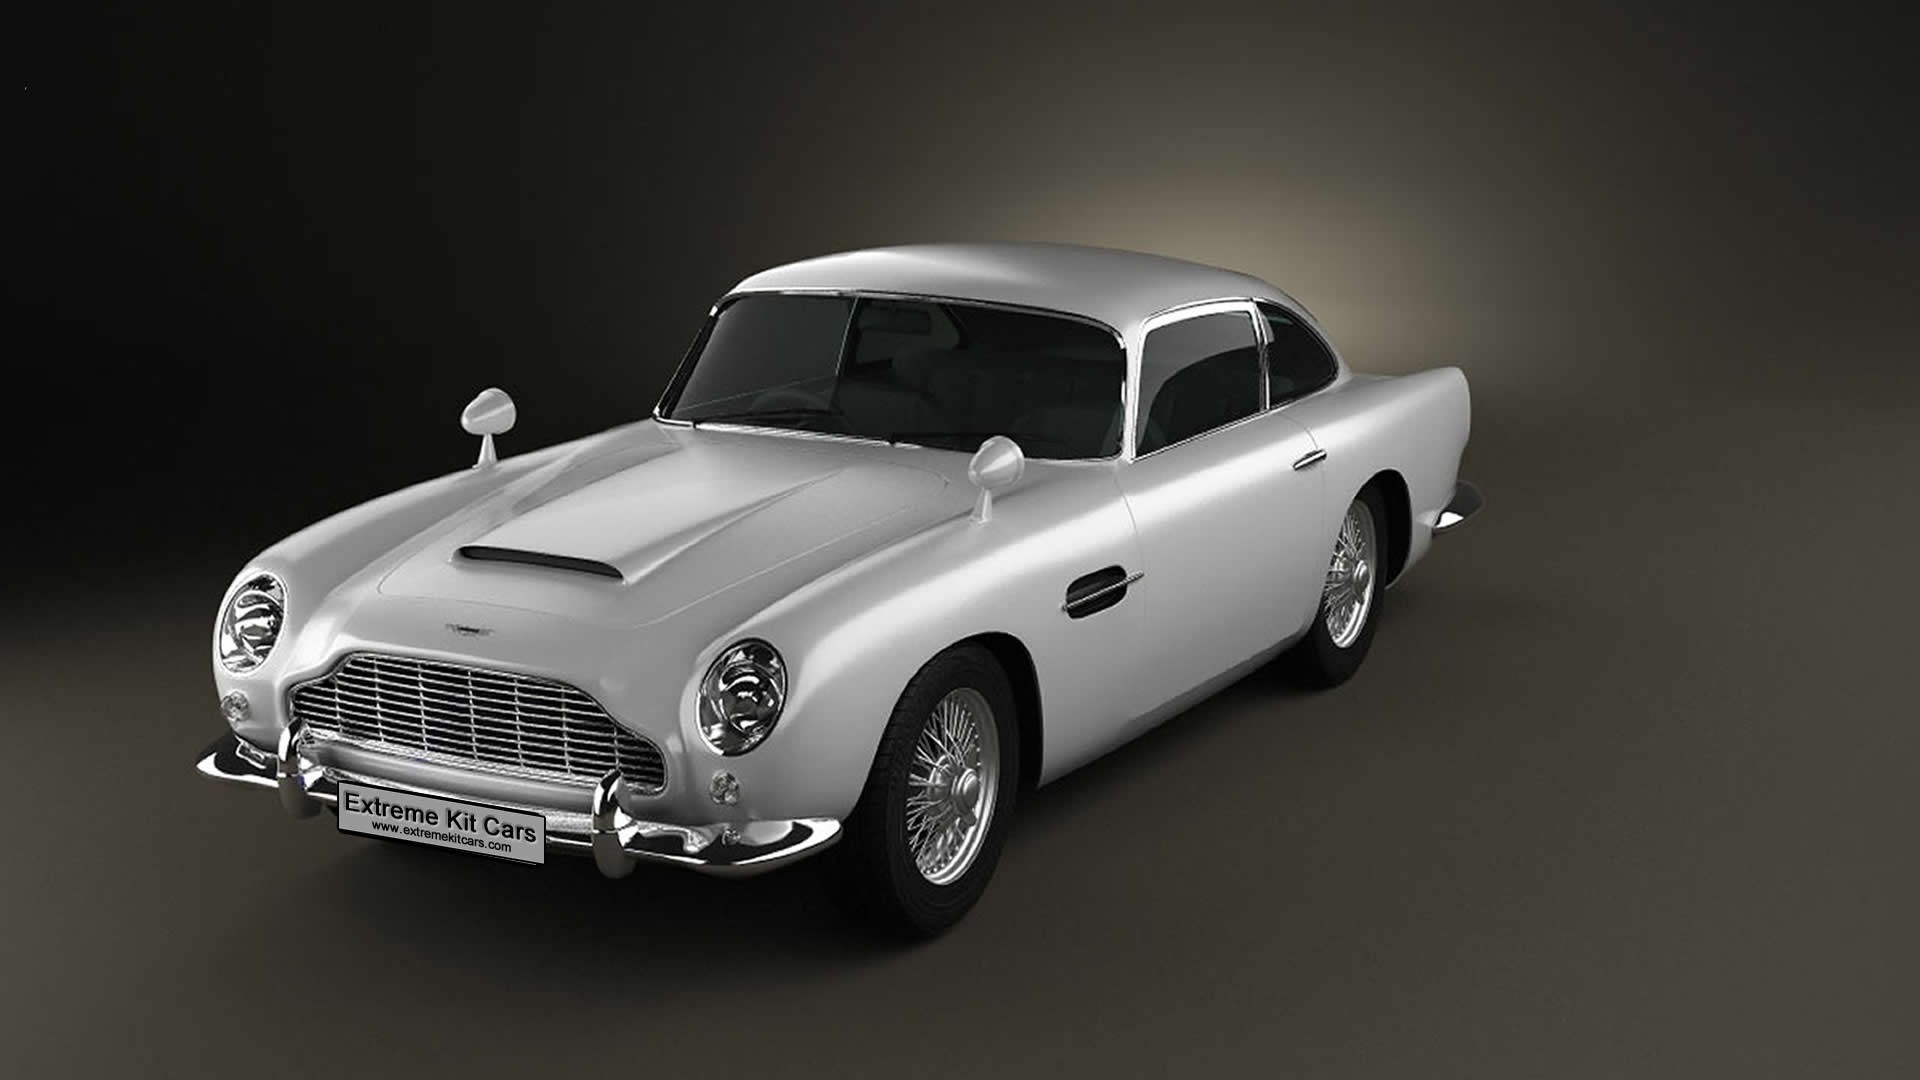 1920x1080 Aston Martin Db5 Wallpapers Images Photos Pictures Backgrounds Wallpaper  Theme